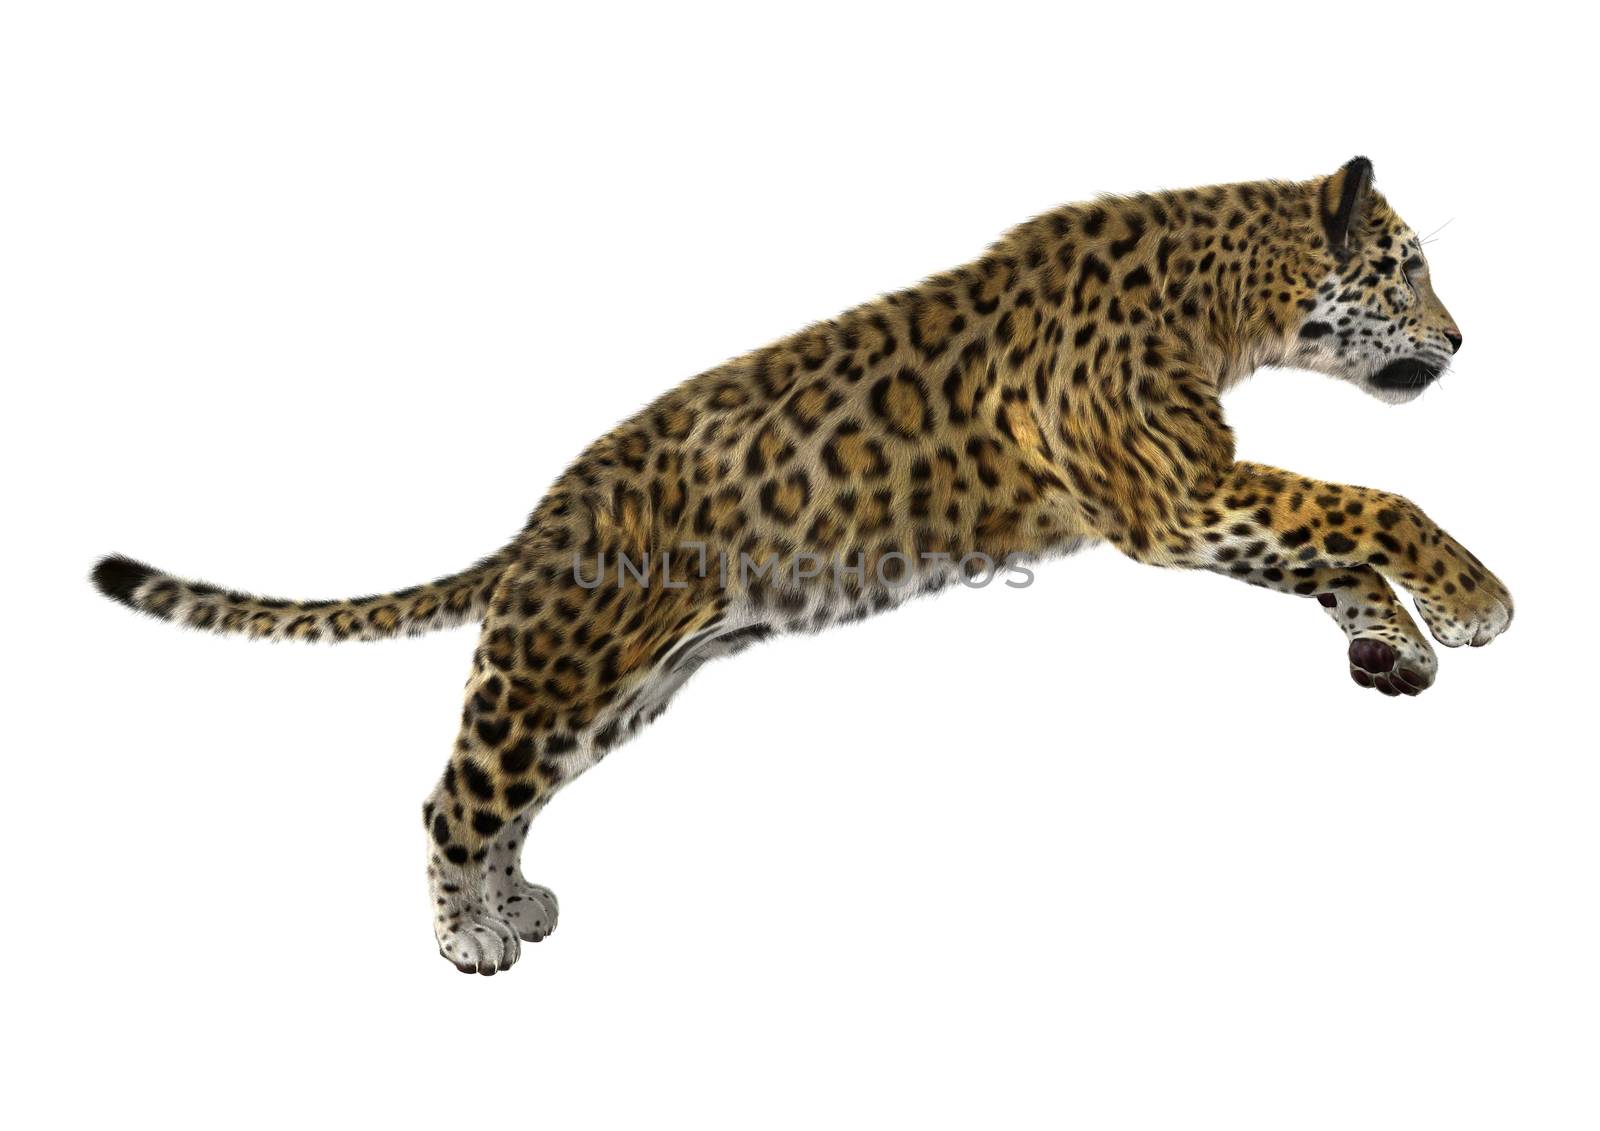 3D digital render of a big cat jaguar jumping iisolated on white background